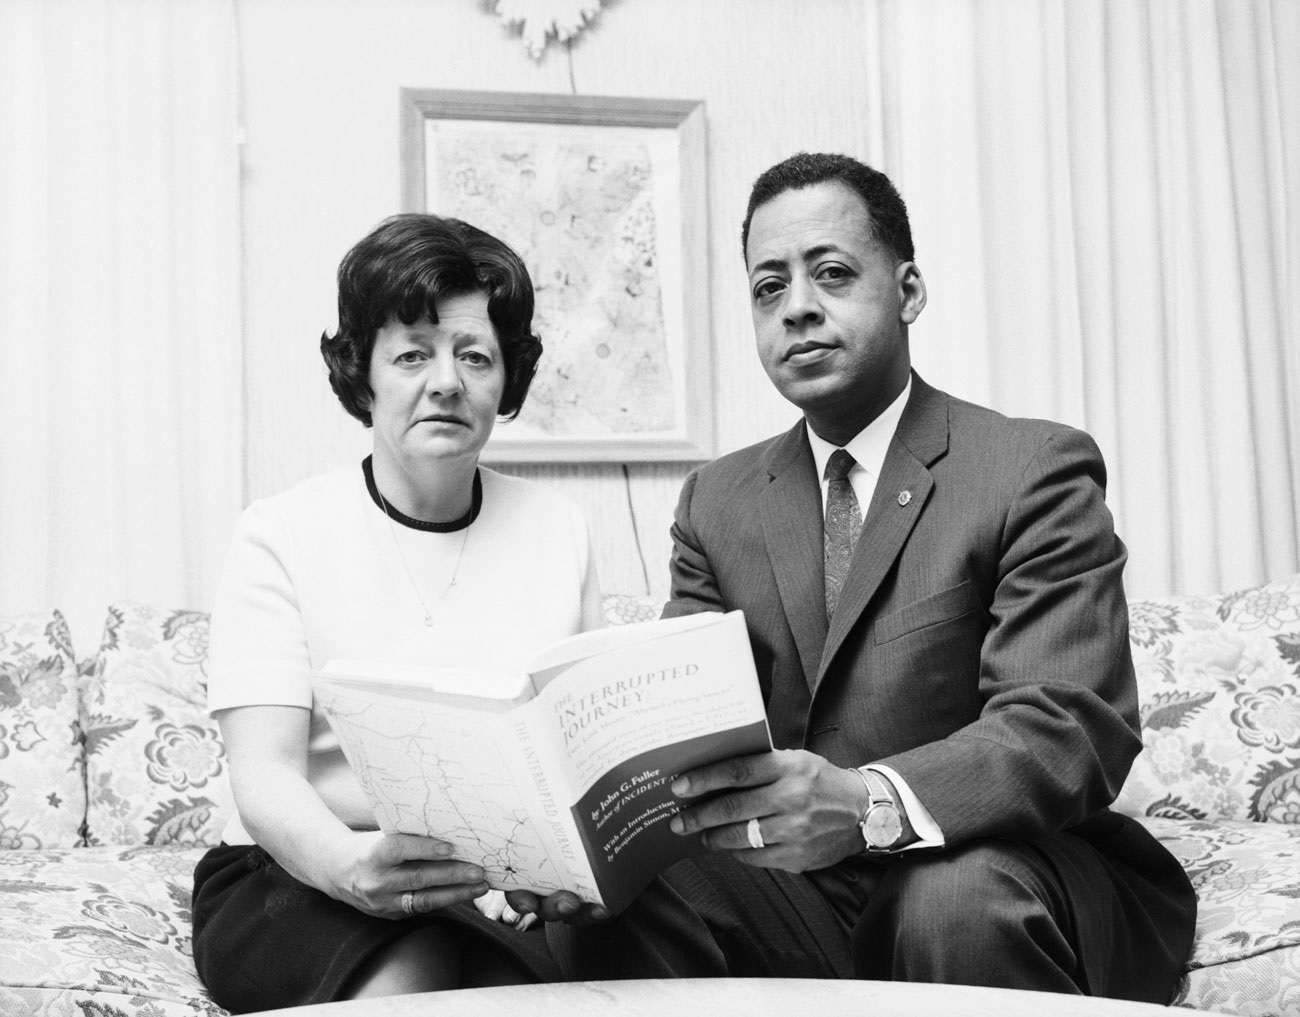 Betty and Barney Hill holding the 1966 book Interrupted Journey.